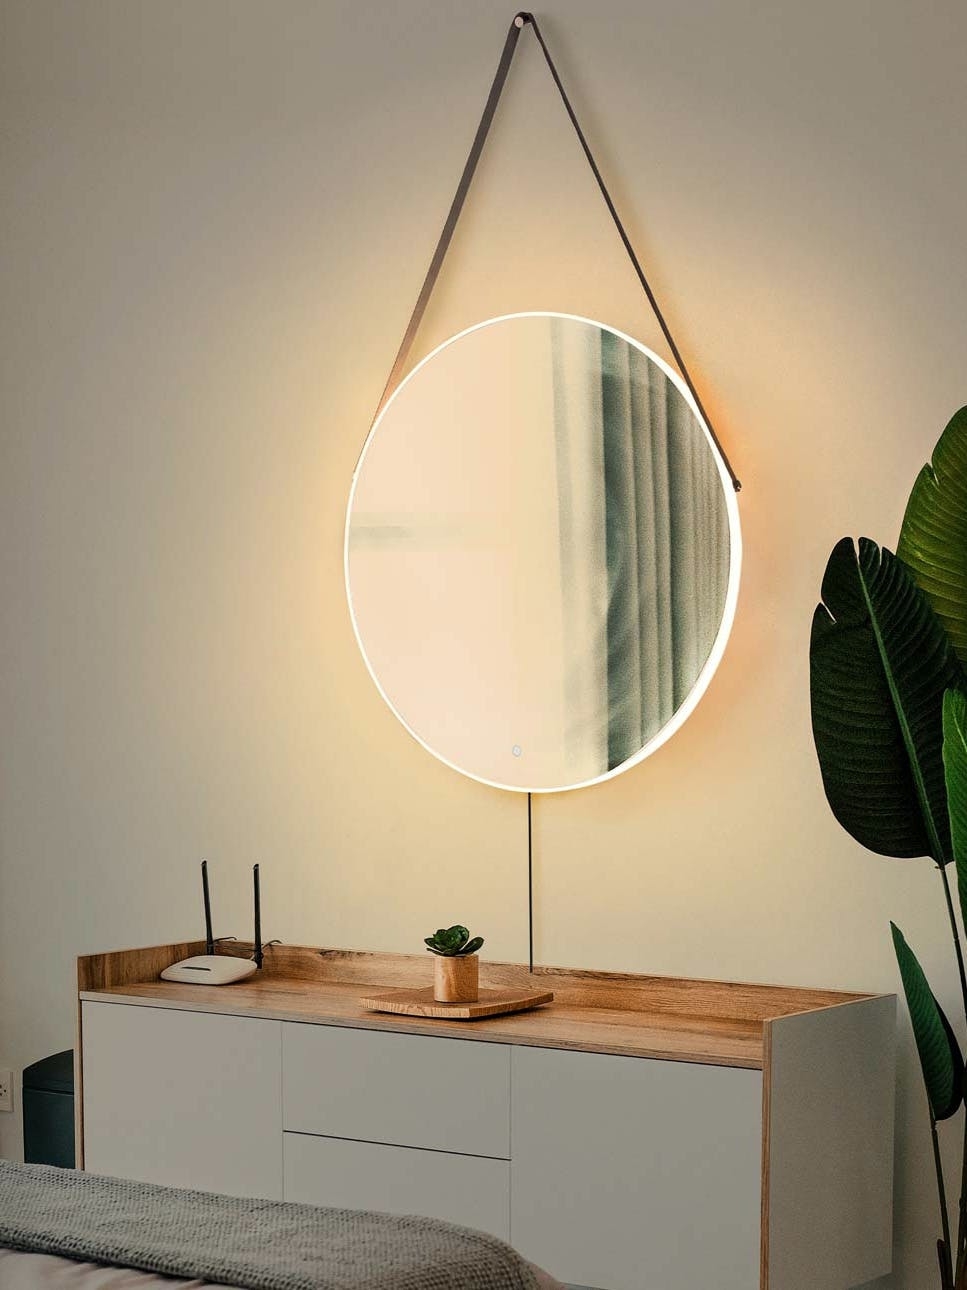 round wall mirror backit by warm LED lights